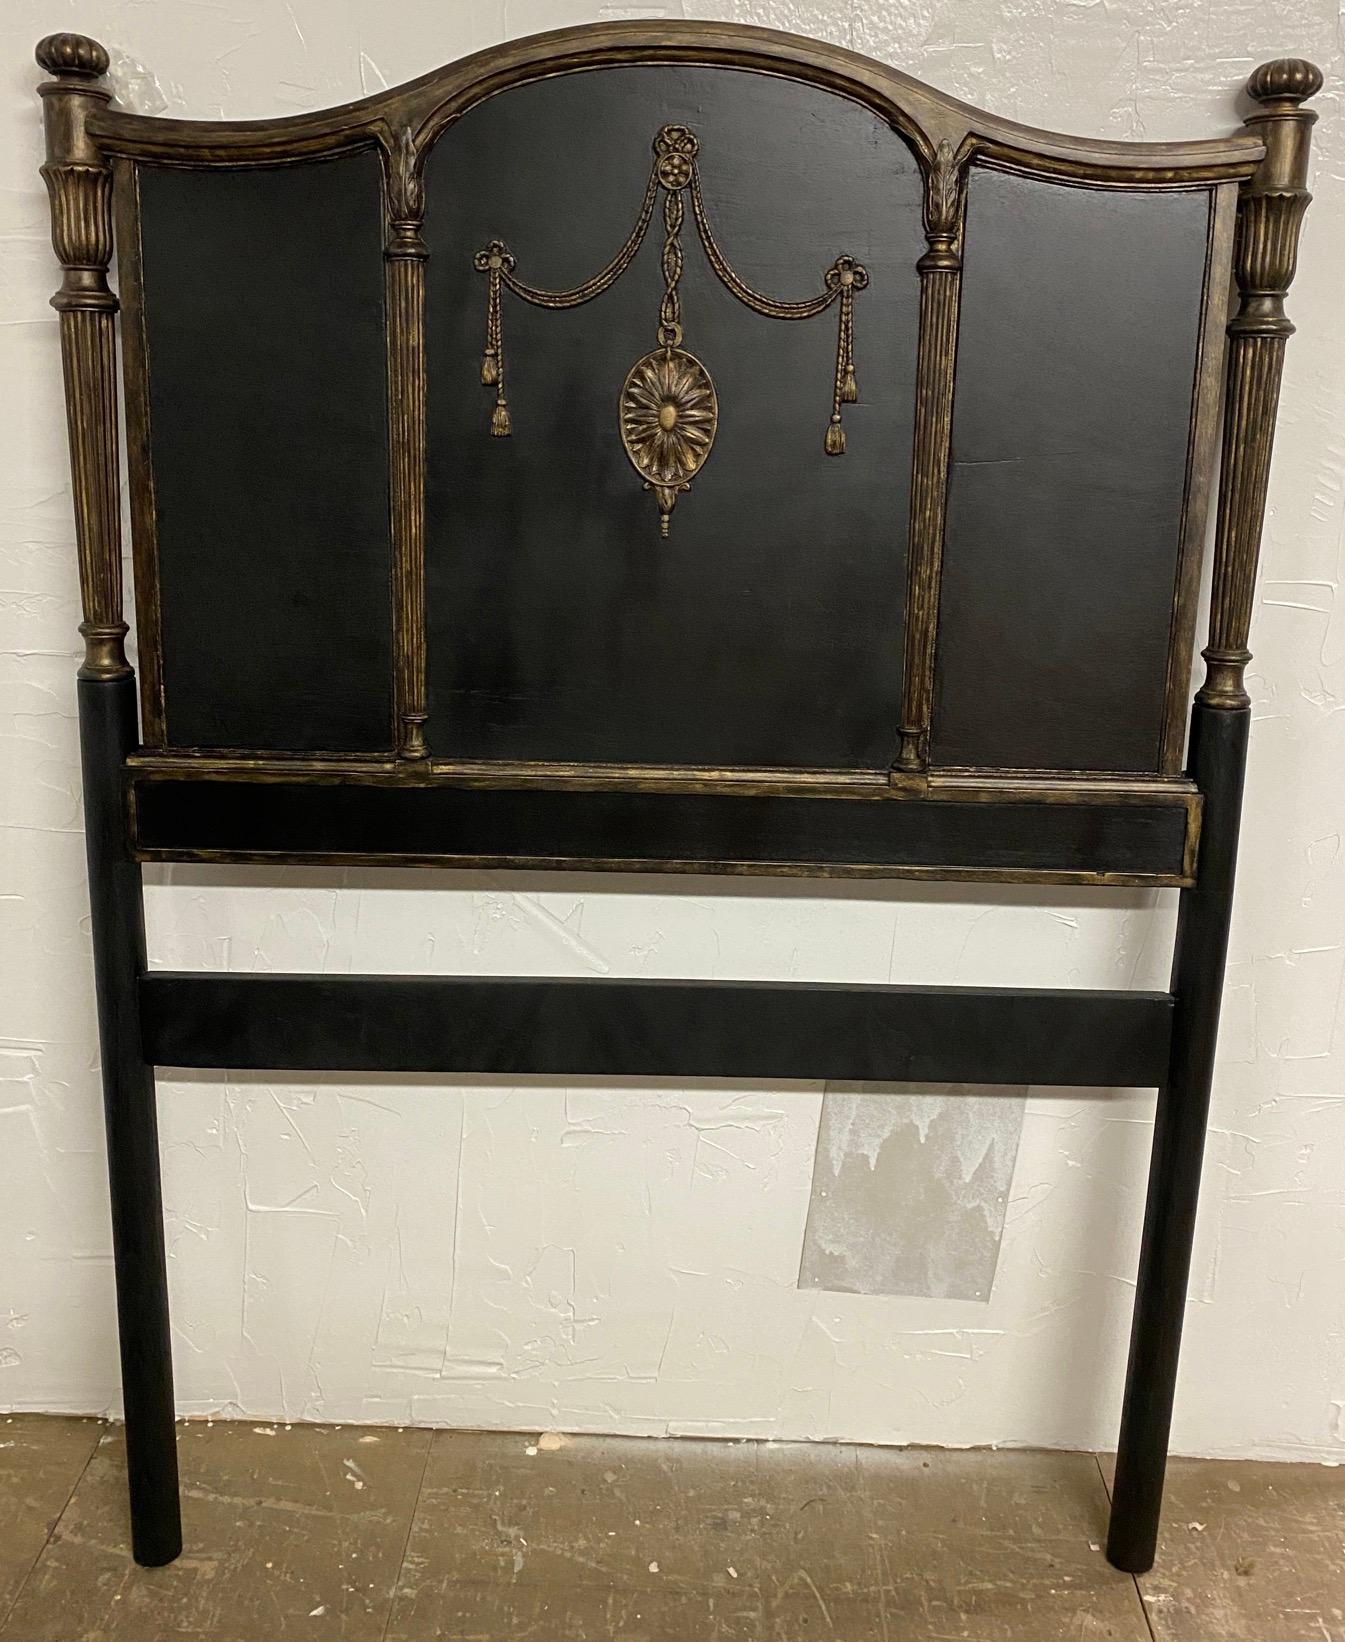 Louis XVI style headboard for a single or twin bed. Great style -- hand painted with gold 